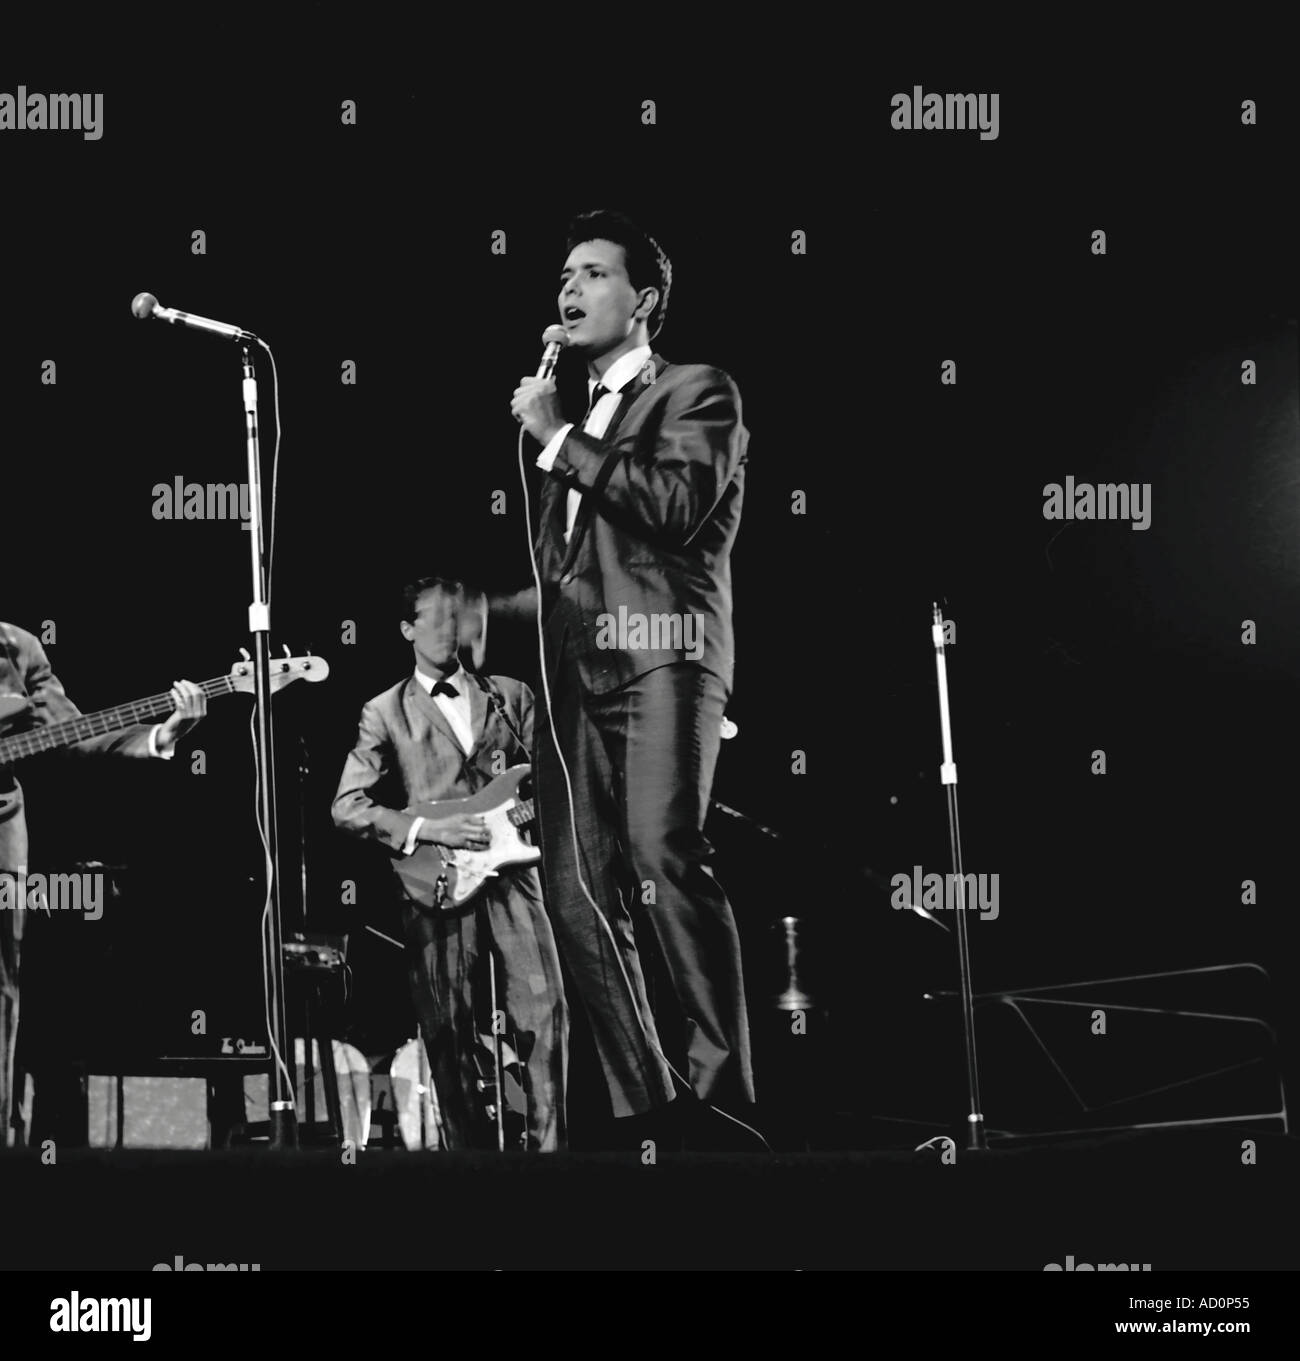 Cliff Richard, with band, performing at the Palladium. Photo by Harry Hammond, UK, 1961. Stock Photo